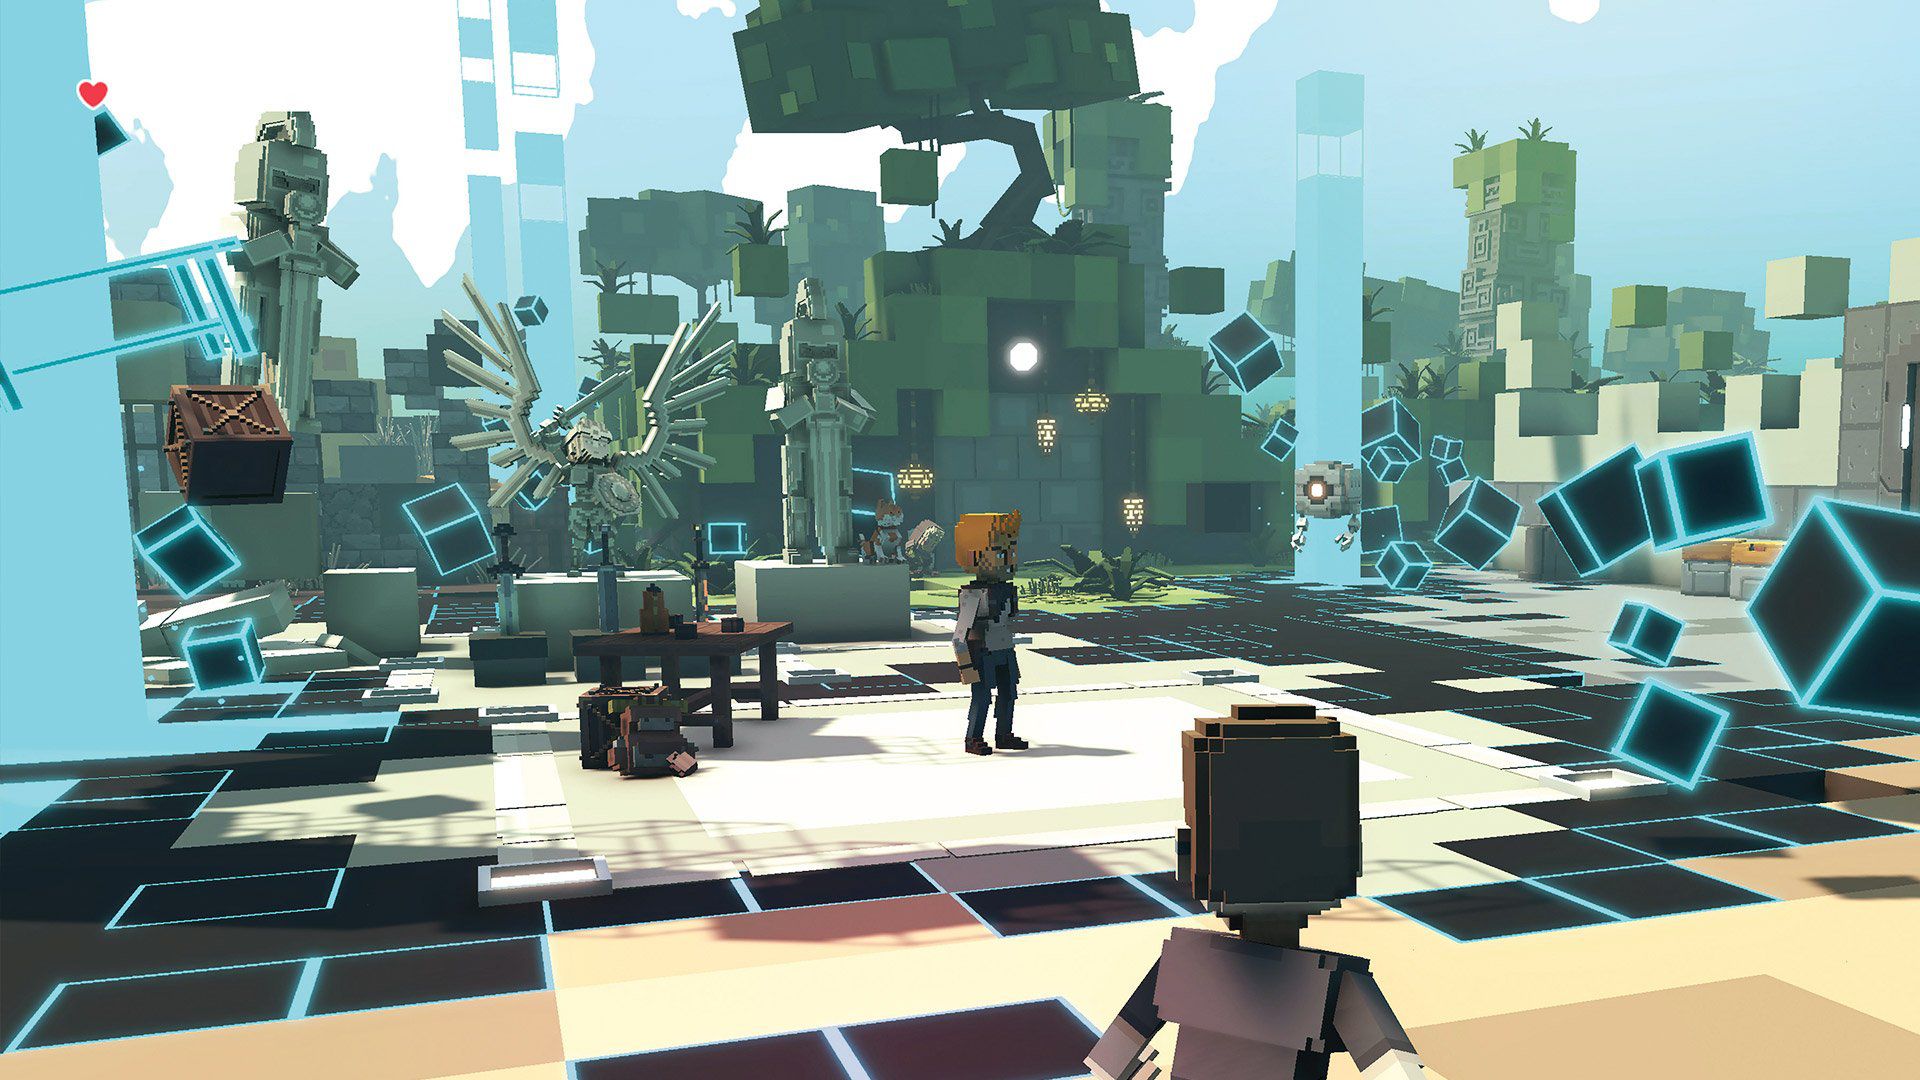 The Metaverse Enables Us To Investigate Human Creativity, The Sandbox Founder Says